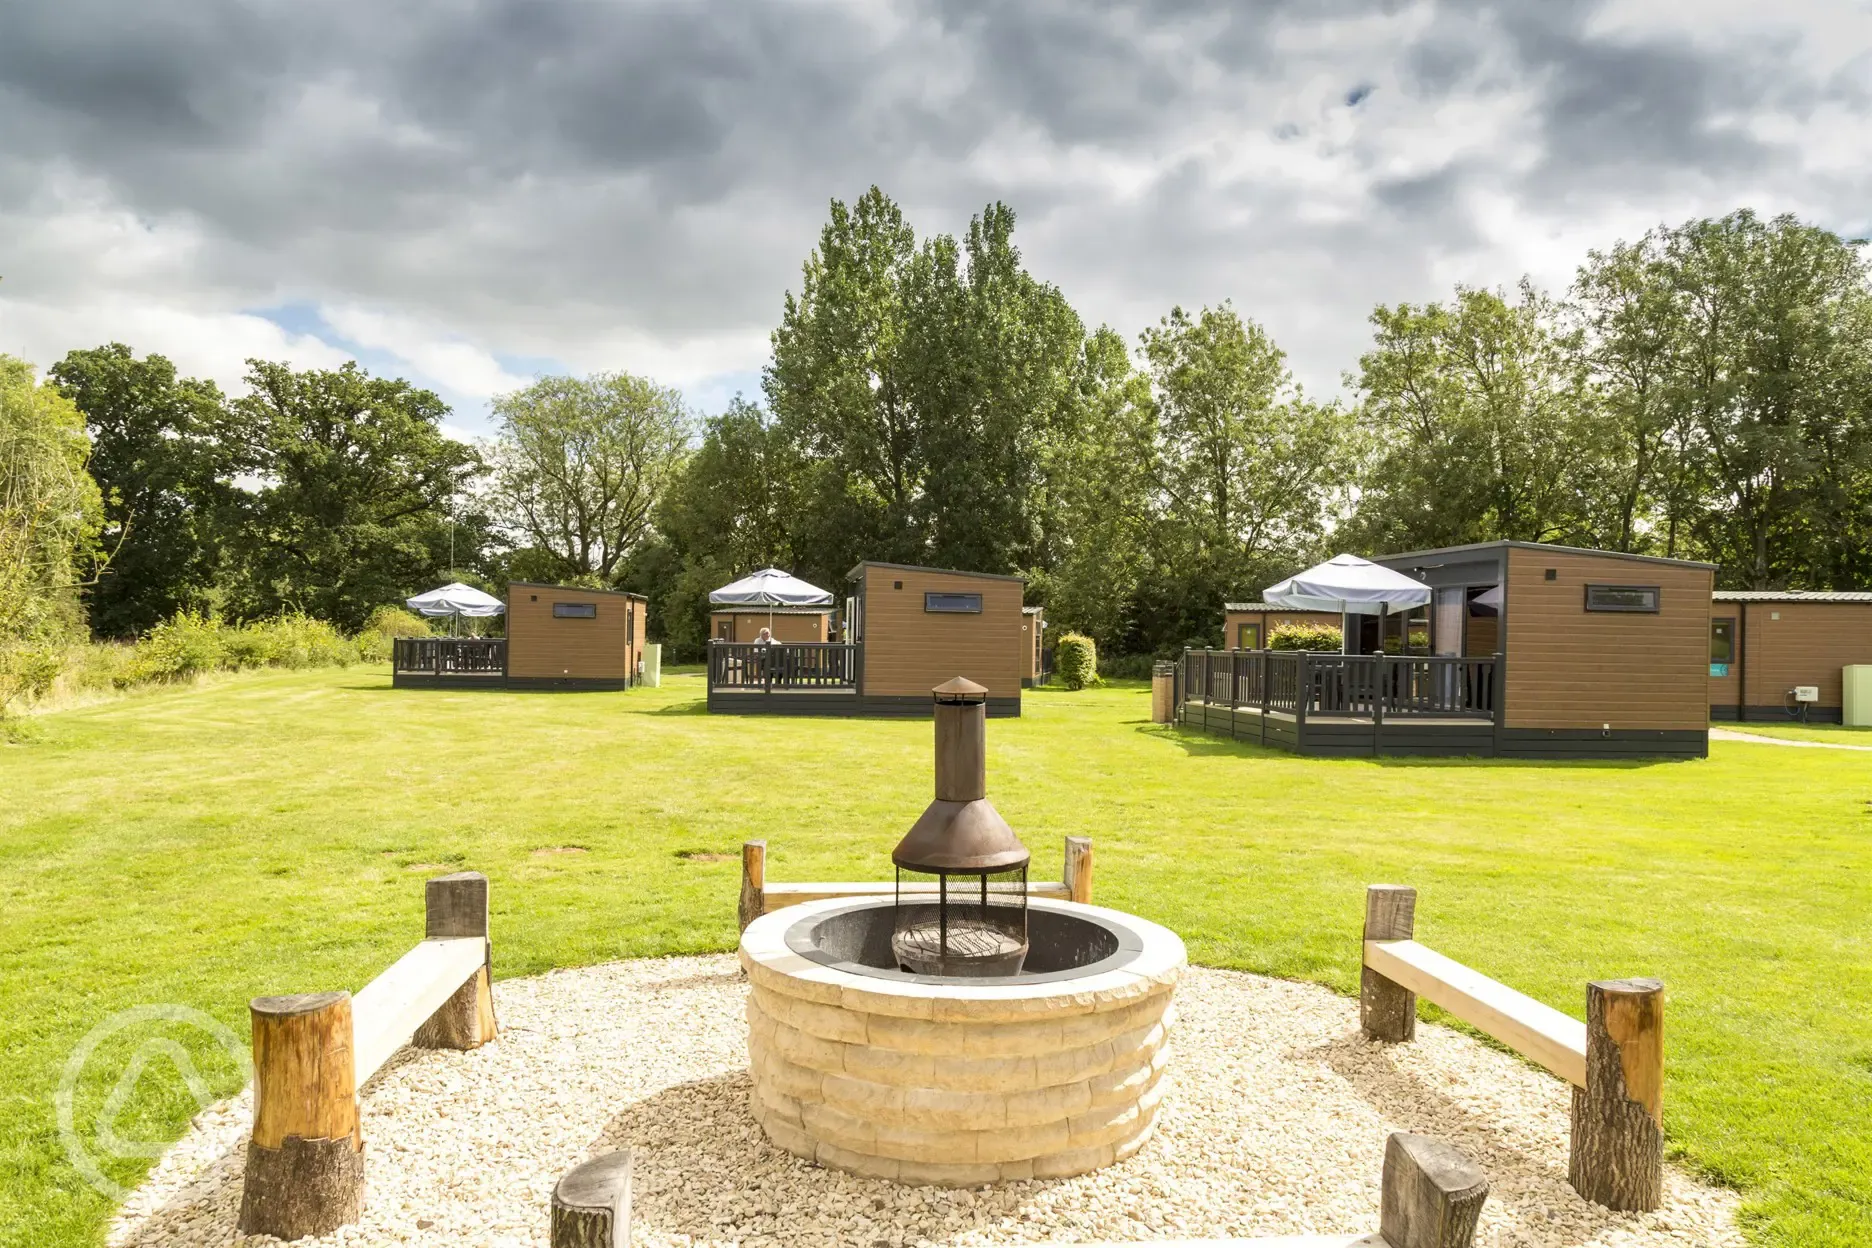 Glamping communal fire pit and social area